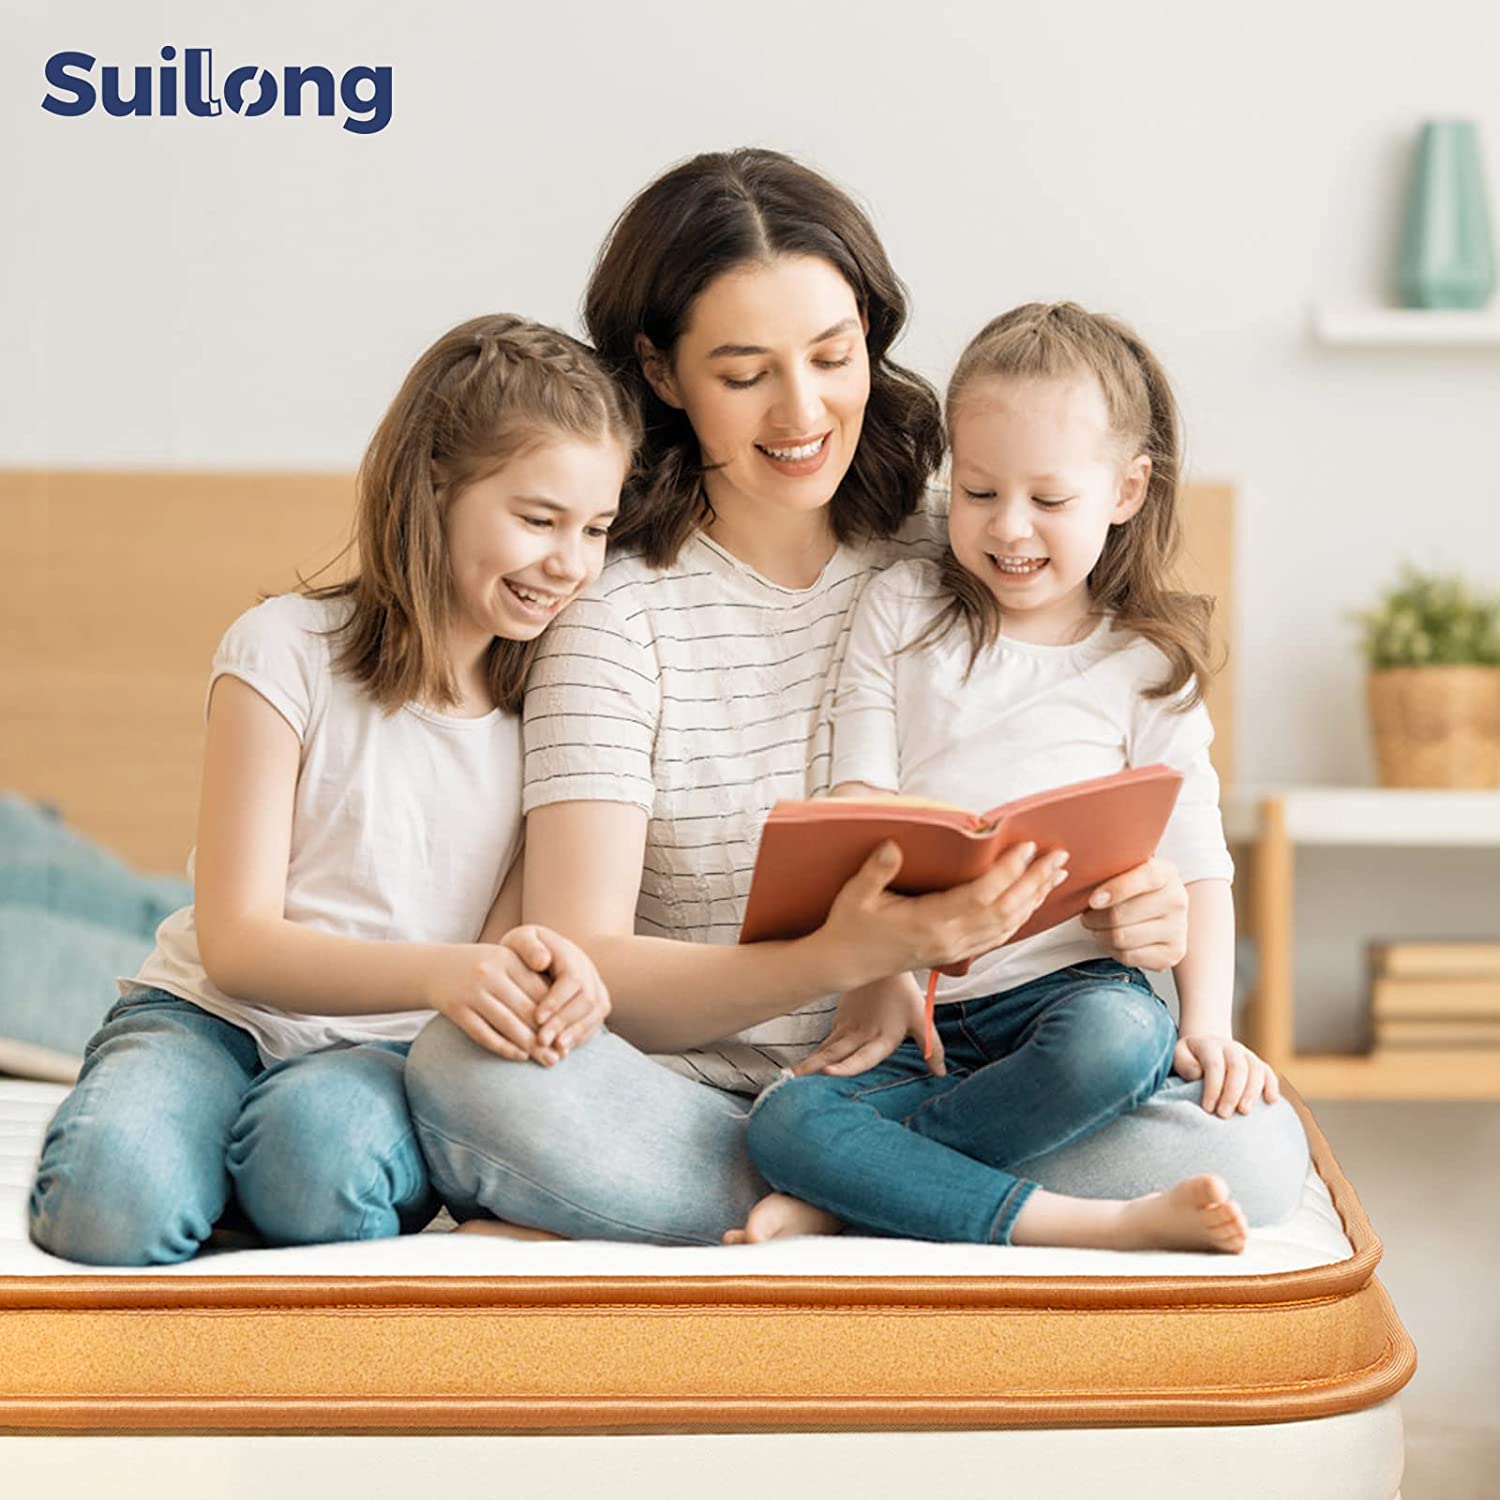 Suilong 24cm Hybrid Mattress - A Comfortable and Supportive Sleep Experience